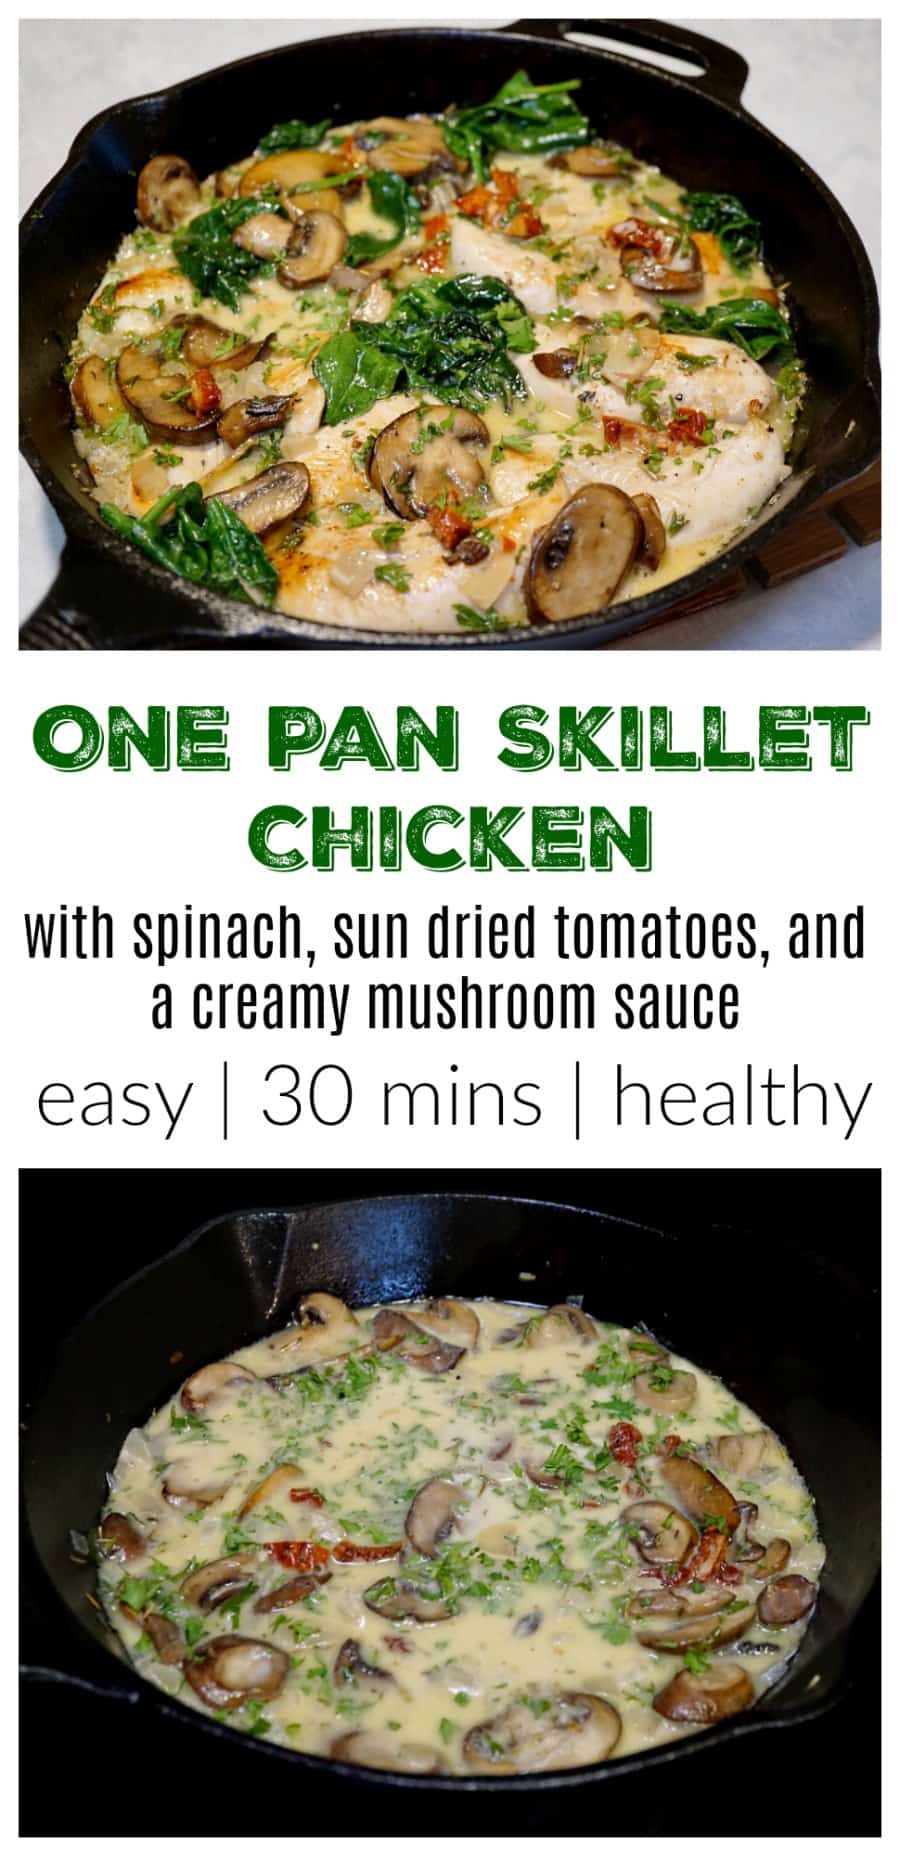 One Pan Skillet Chicken With Spinach Sun Dried Tomatoes and Creamy Mushroom Sauce pin